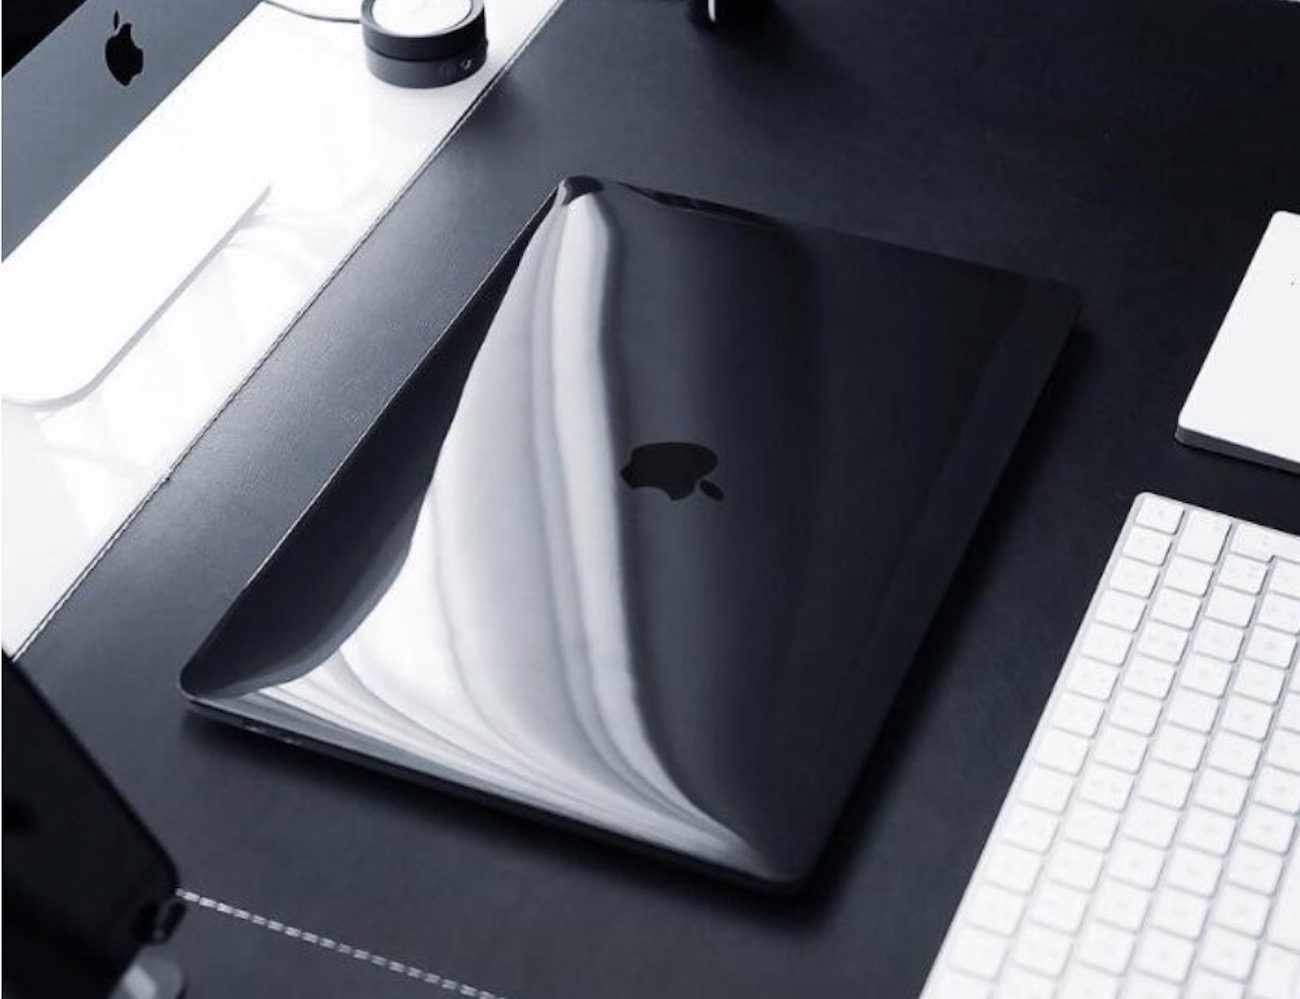 Solid MacBook Pro Retina Case offers all-around protection